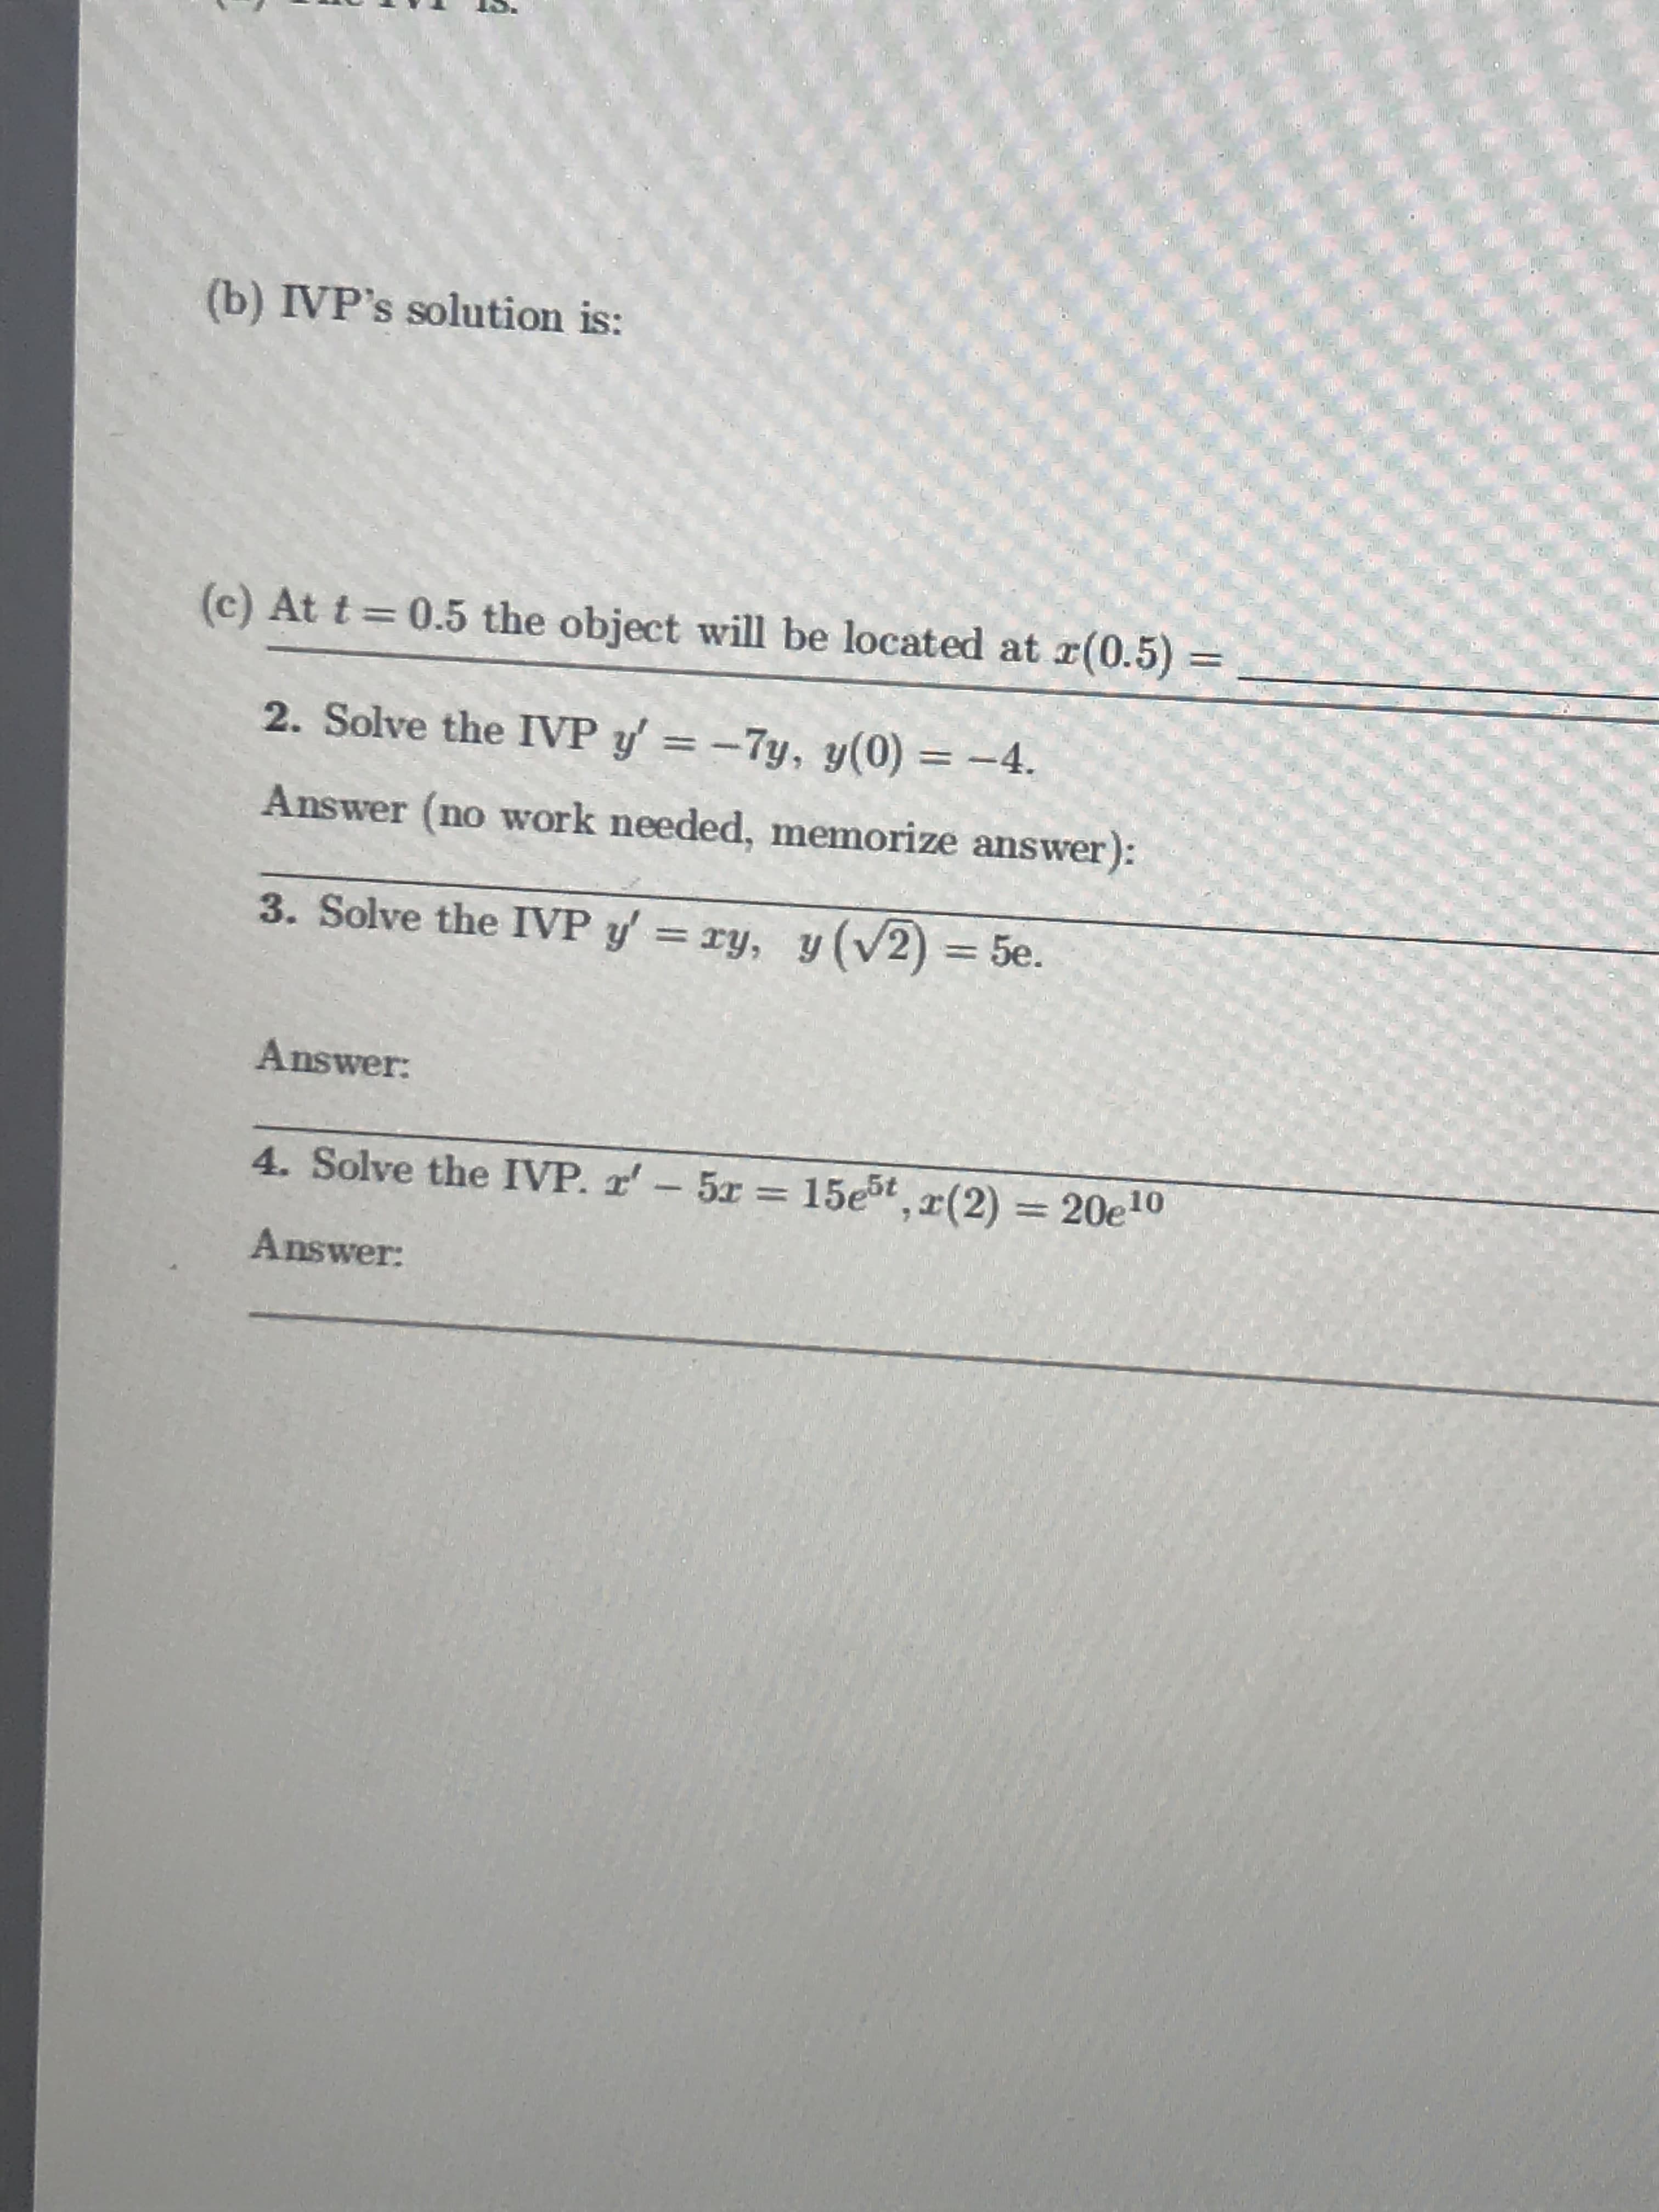 (b) IVP's solution is:
(c) At t
0.5 the object will be located at z(0.5)
2. Solve the IVP y,--7y, y(0) -4.
Answer (no work needed, memorize answer
3. Solve the IVP y' ry, (V2) 5.
):
Answer
4. Solve the IVP. rr_ 5r = 15e5,x(2) = 20e10
Answer:
